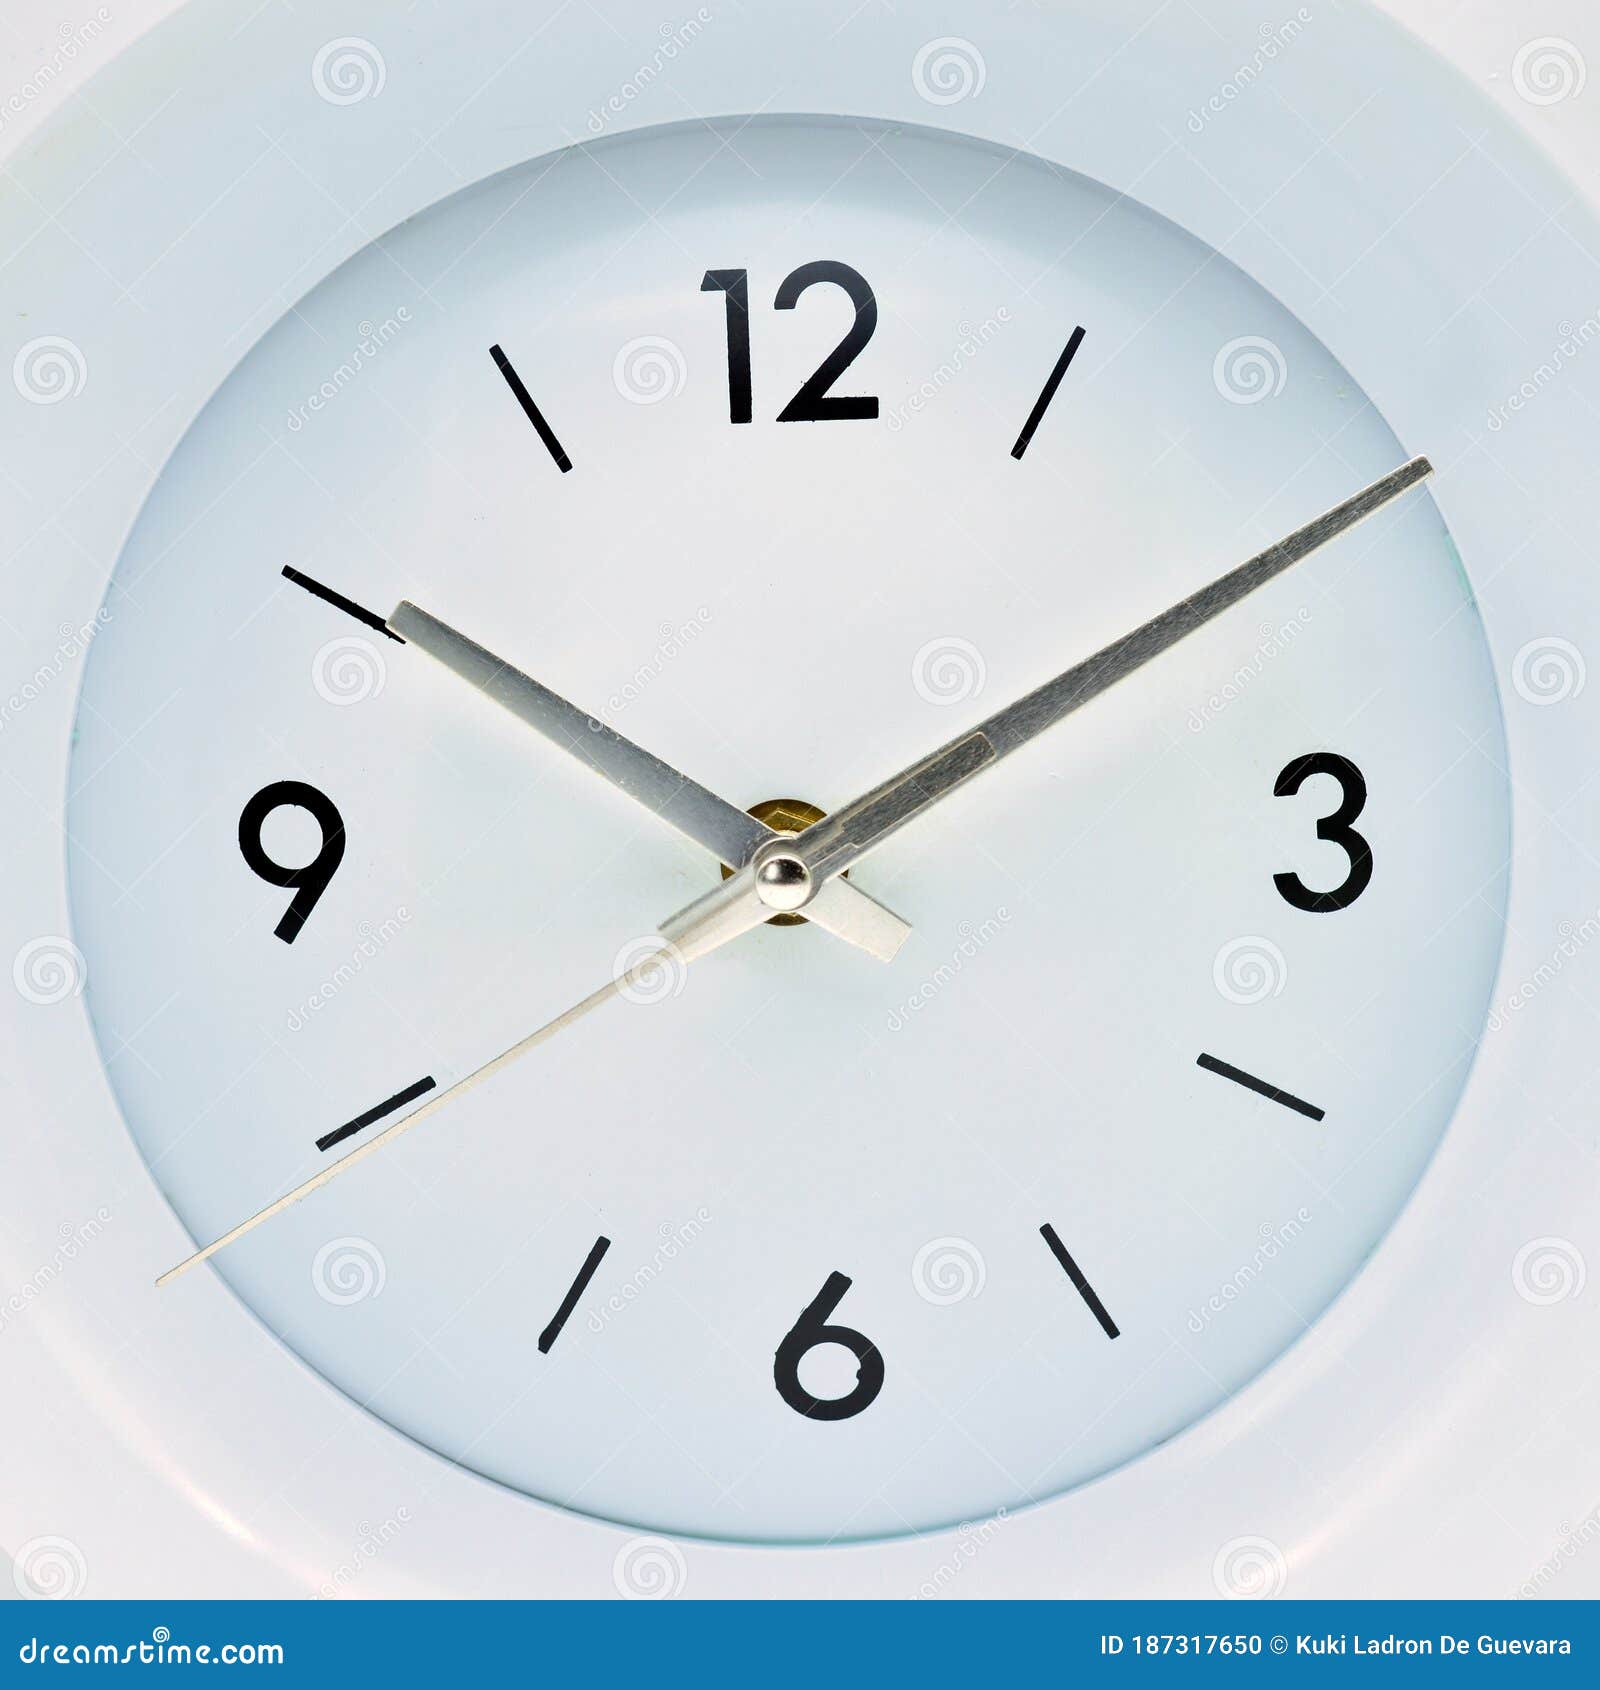 wall clock measuring time